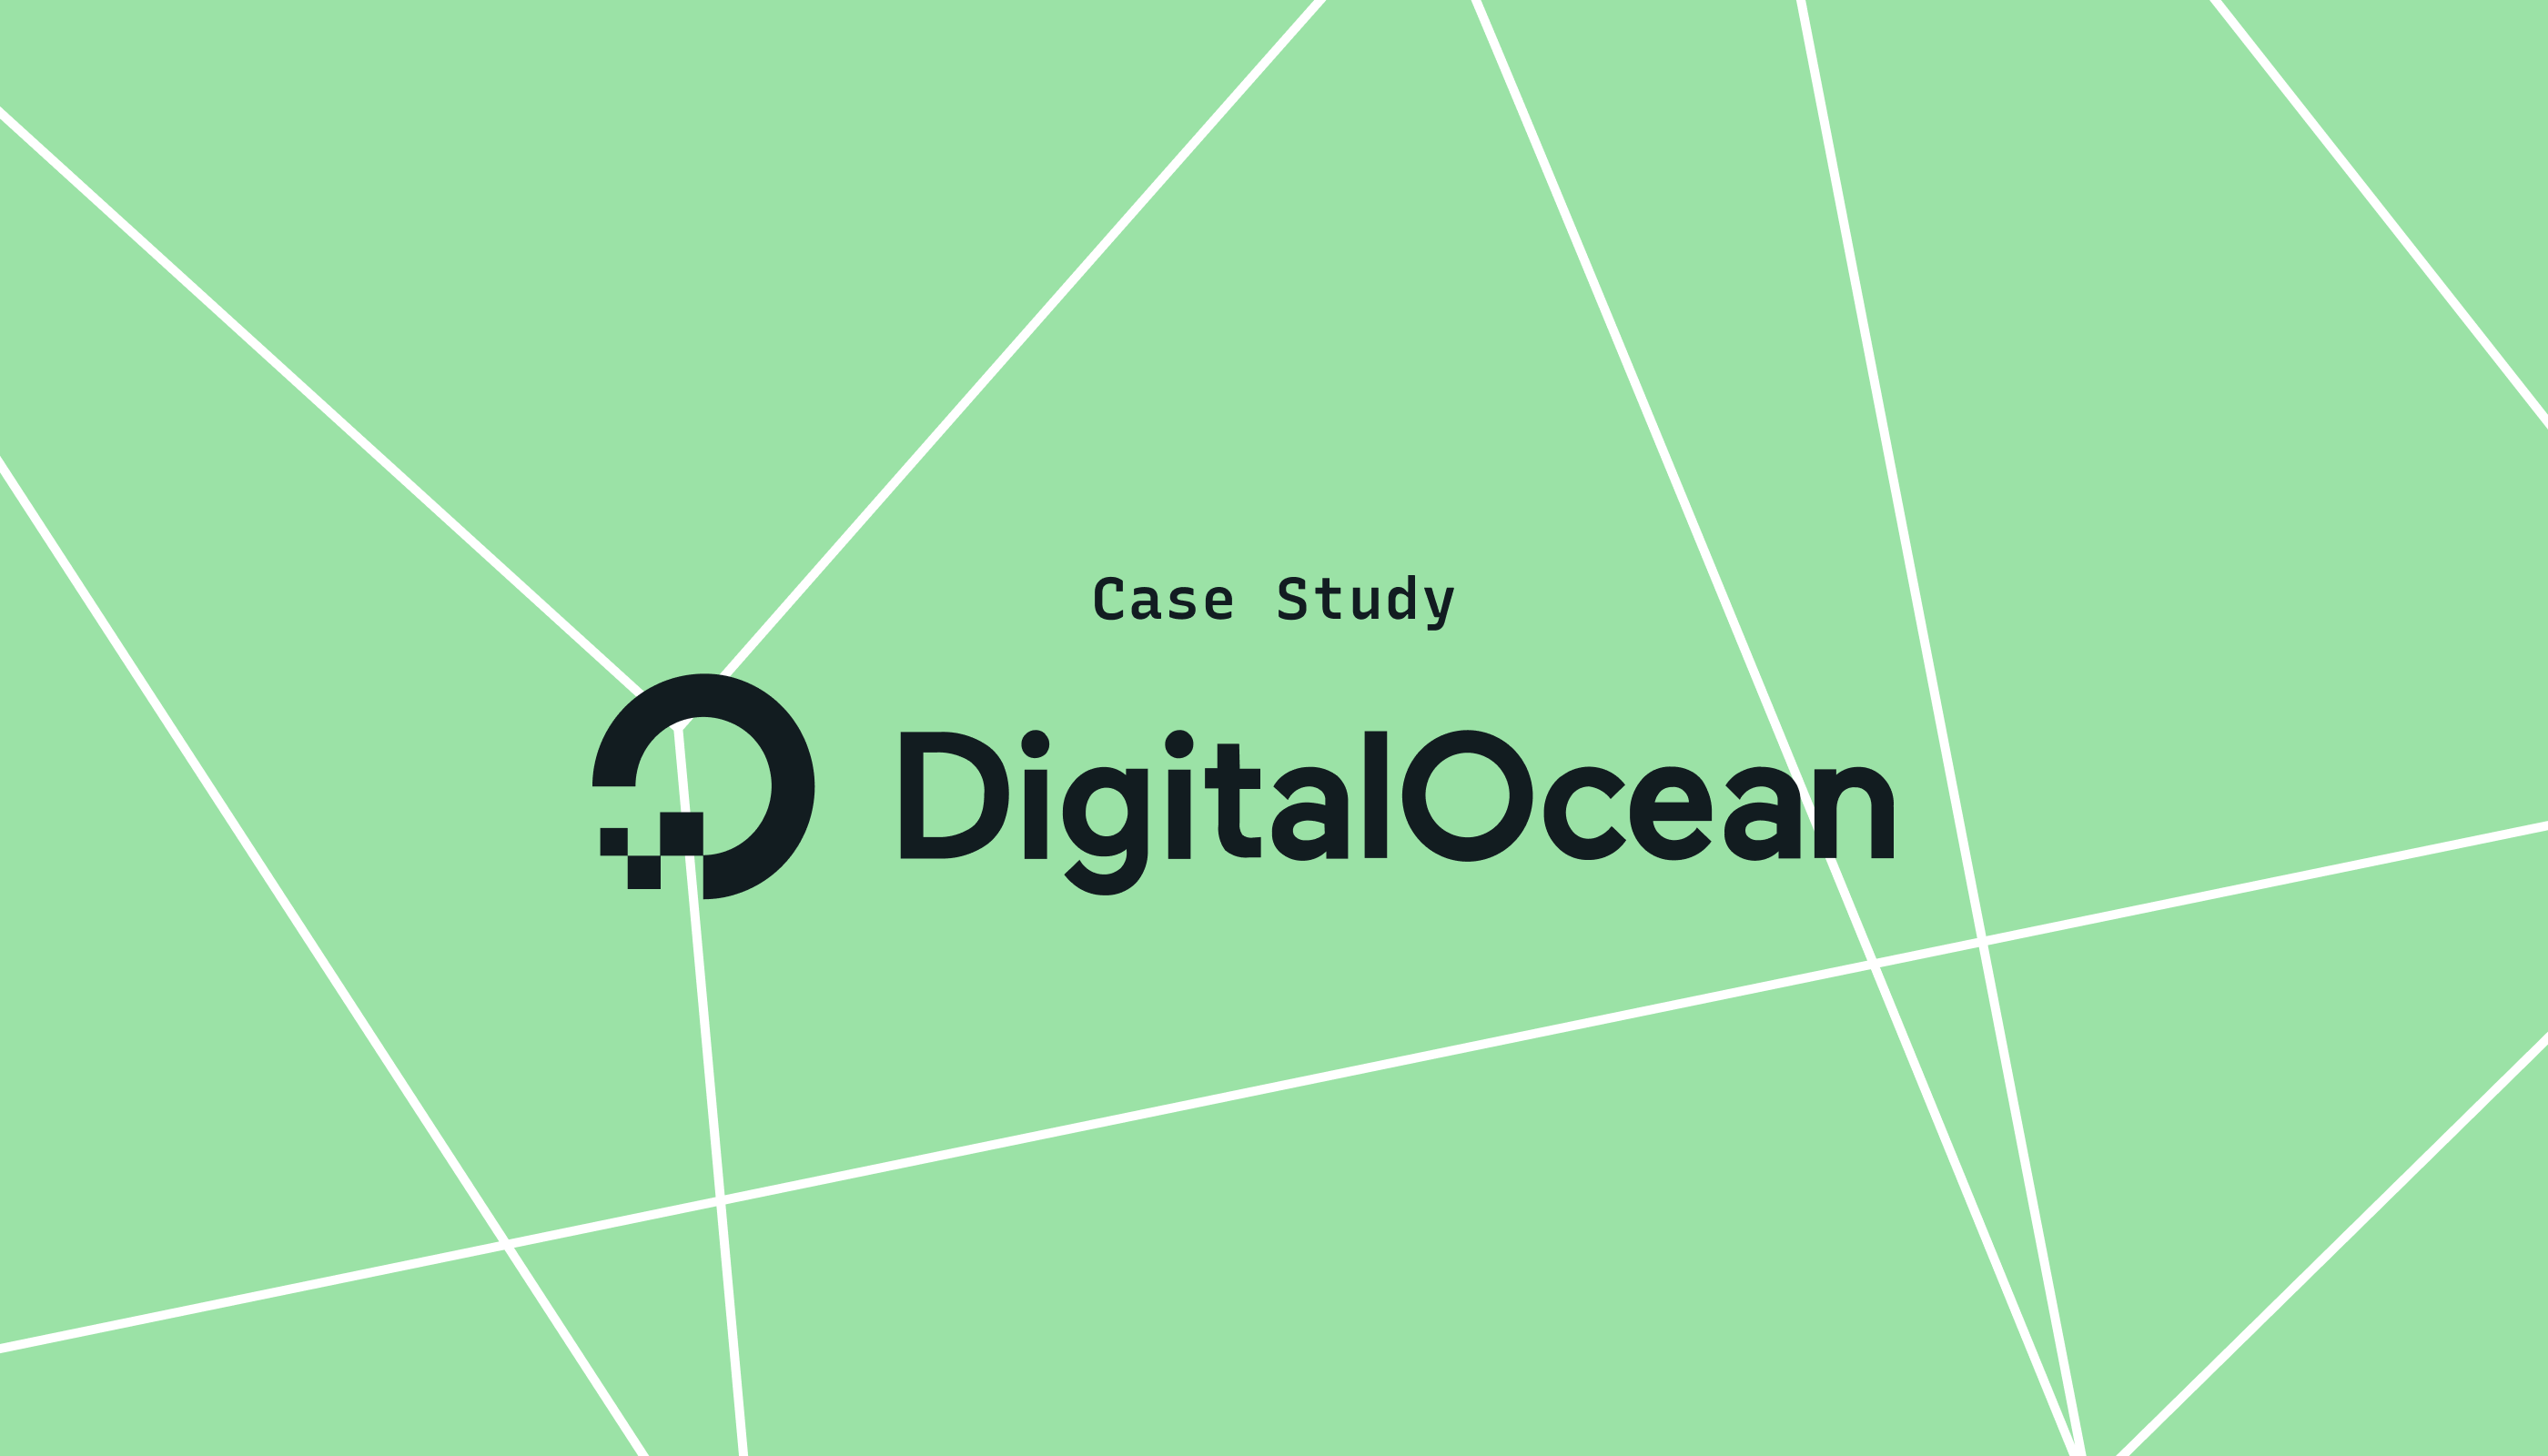 DigitalOcean uses Lightstep as a source of truth for its distributed system, saving 1,000 hours of developer time per month